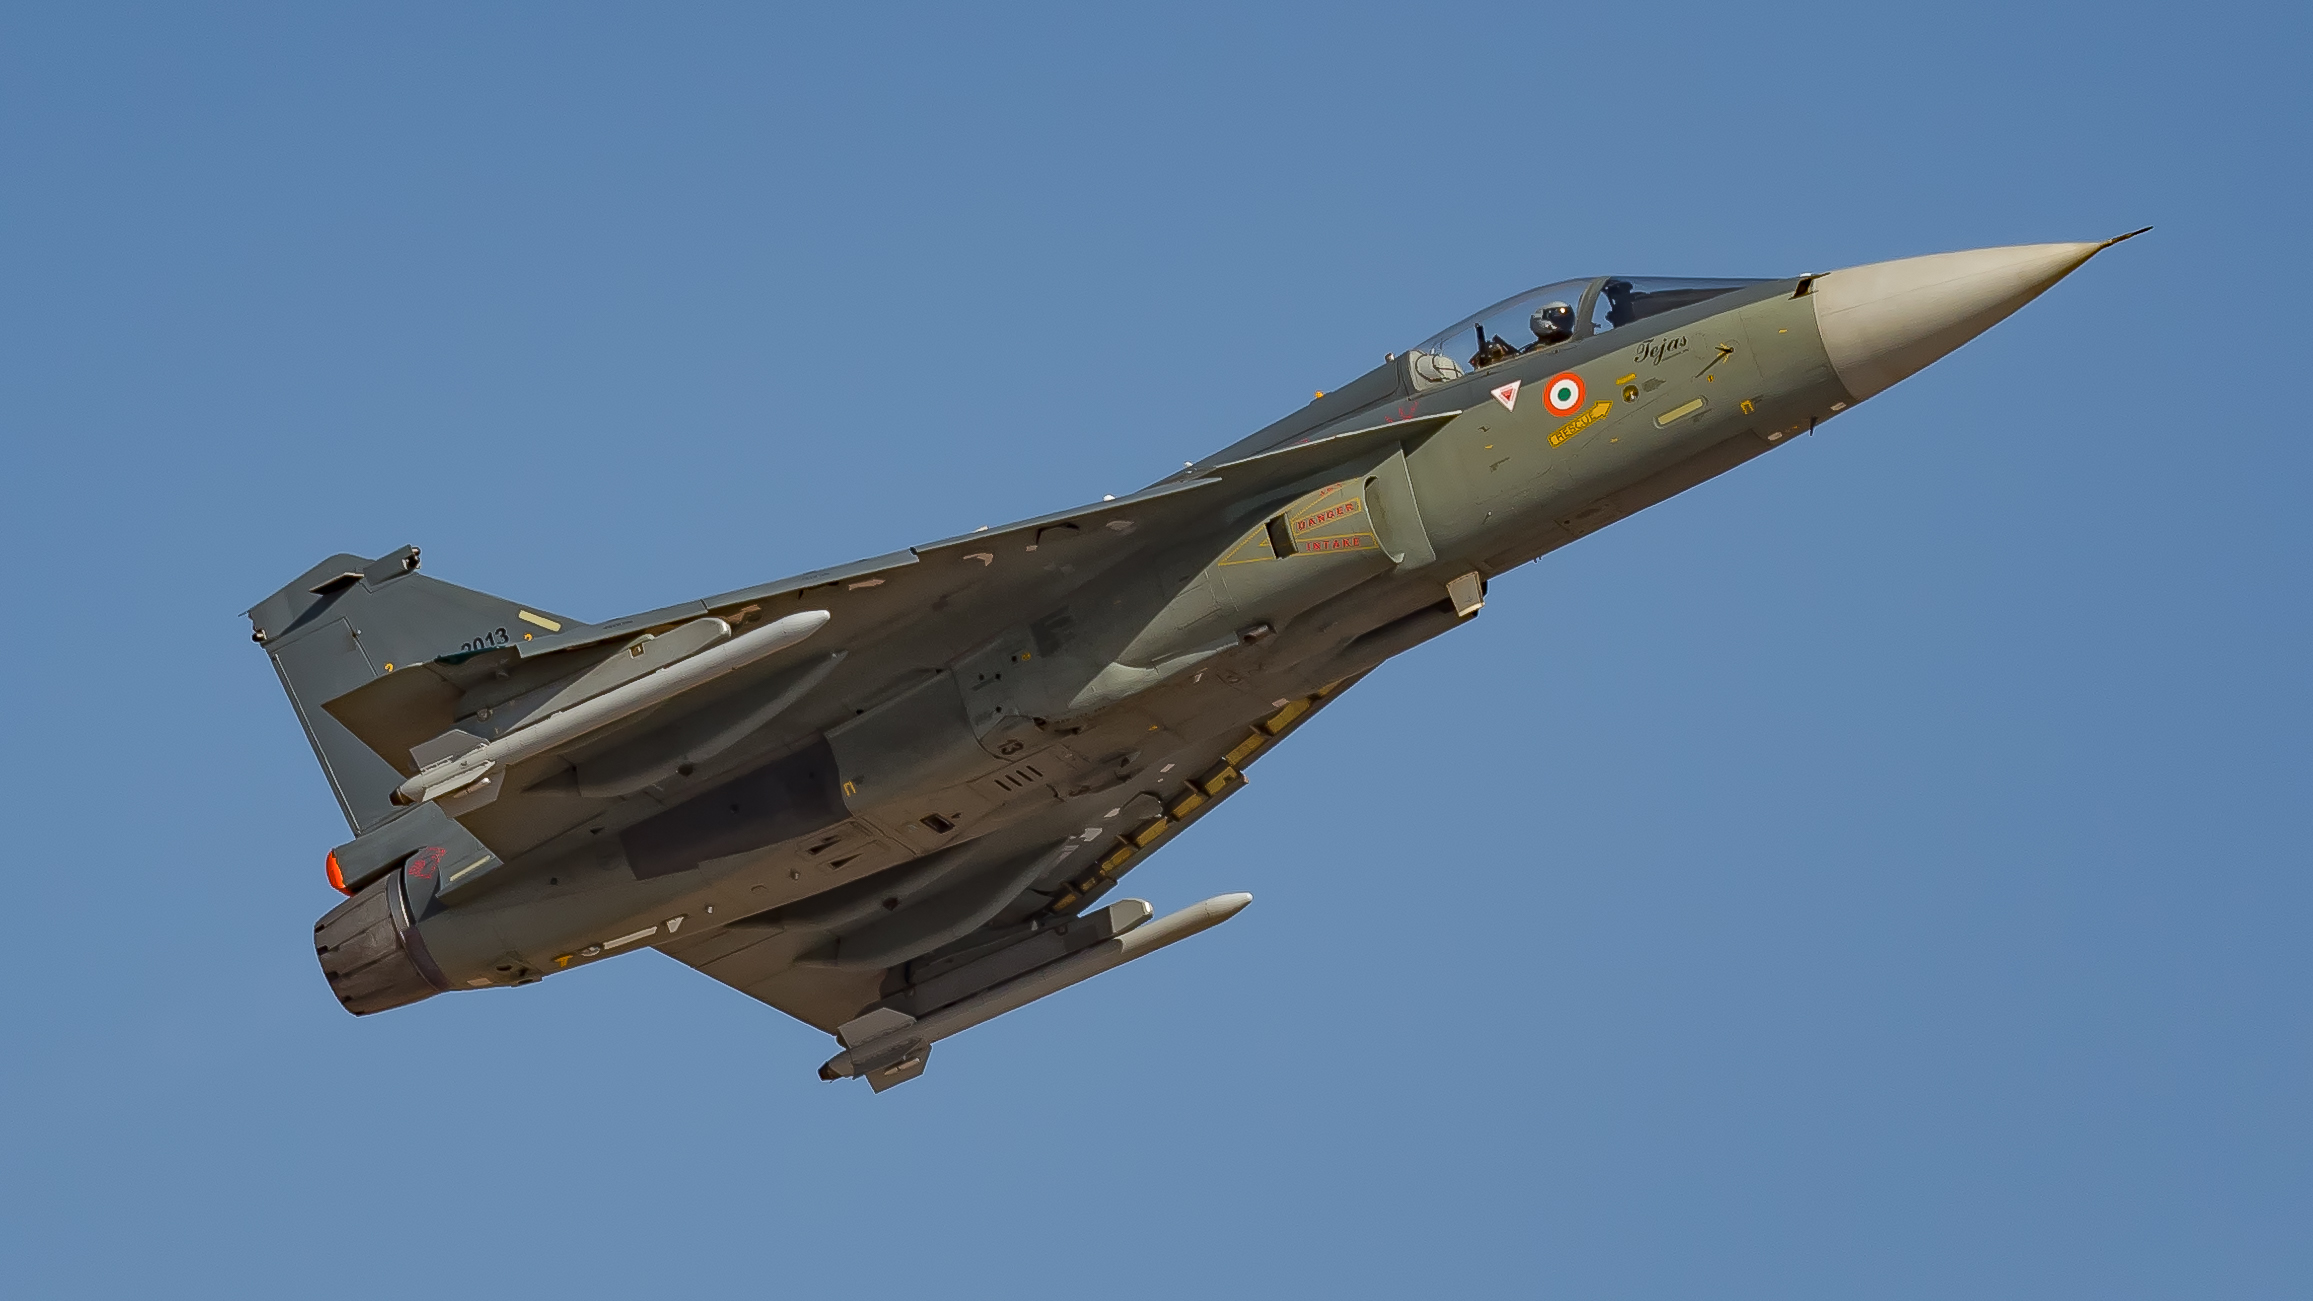 Download Image - Tejas Aircraft , HD Wallpaper & Backgrounds